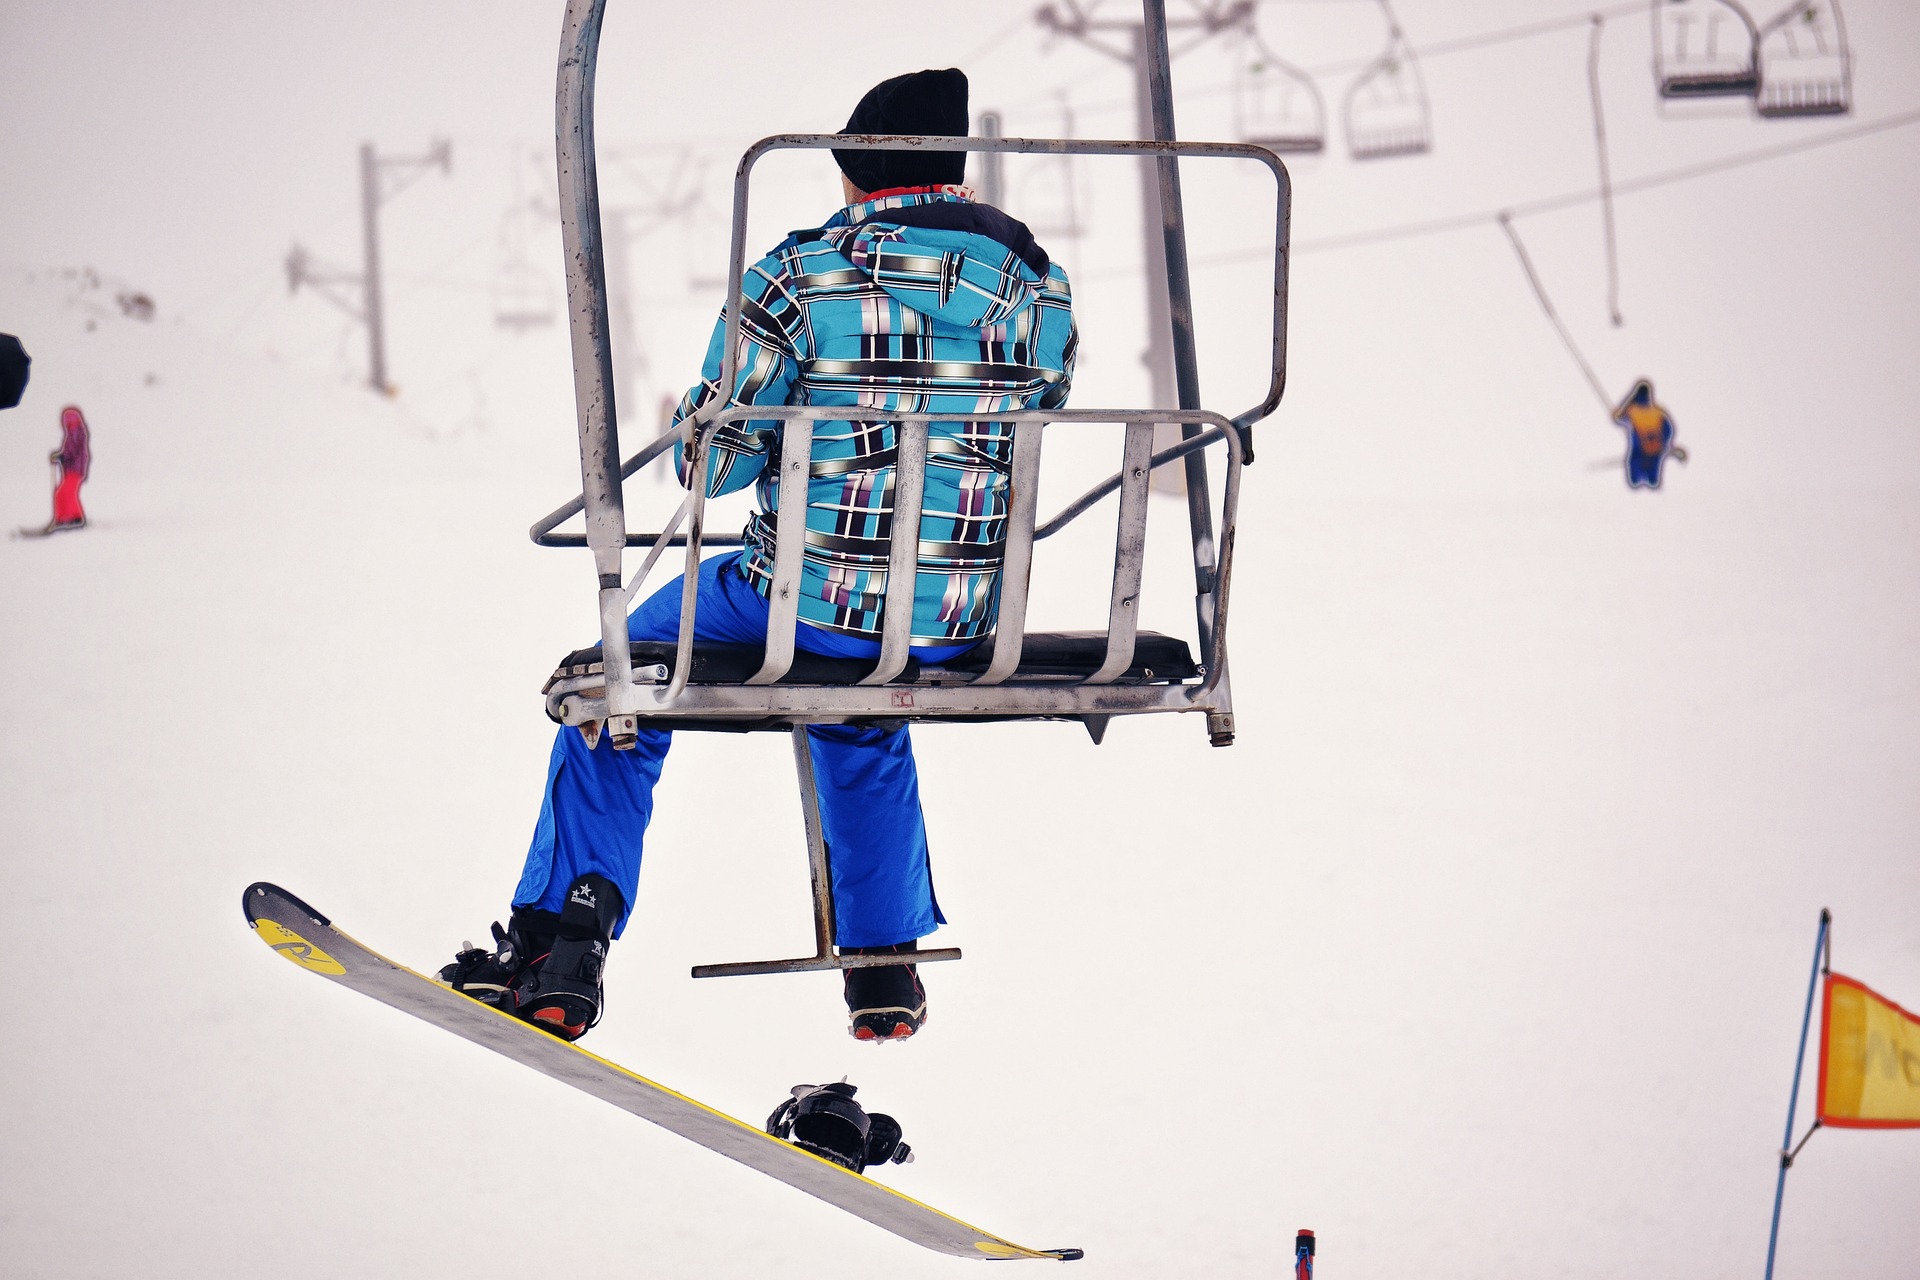 snowboarder riding chair lift